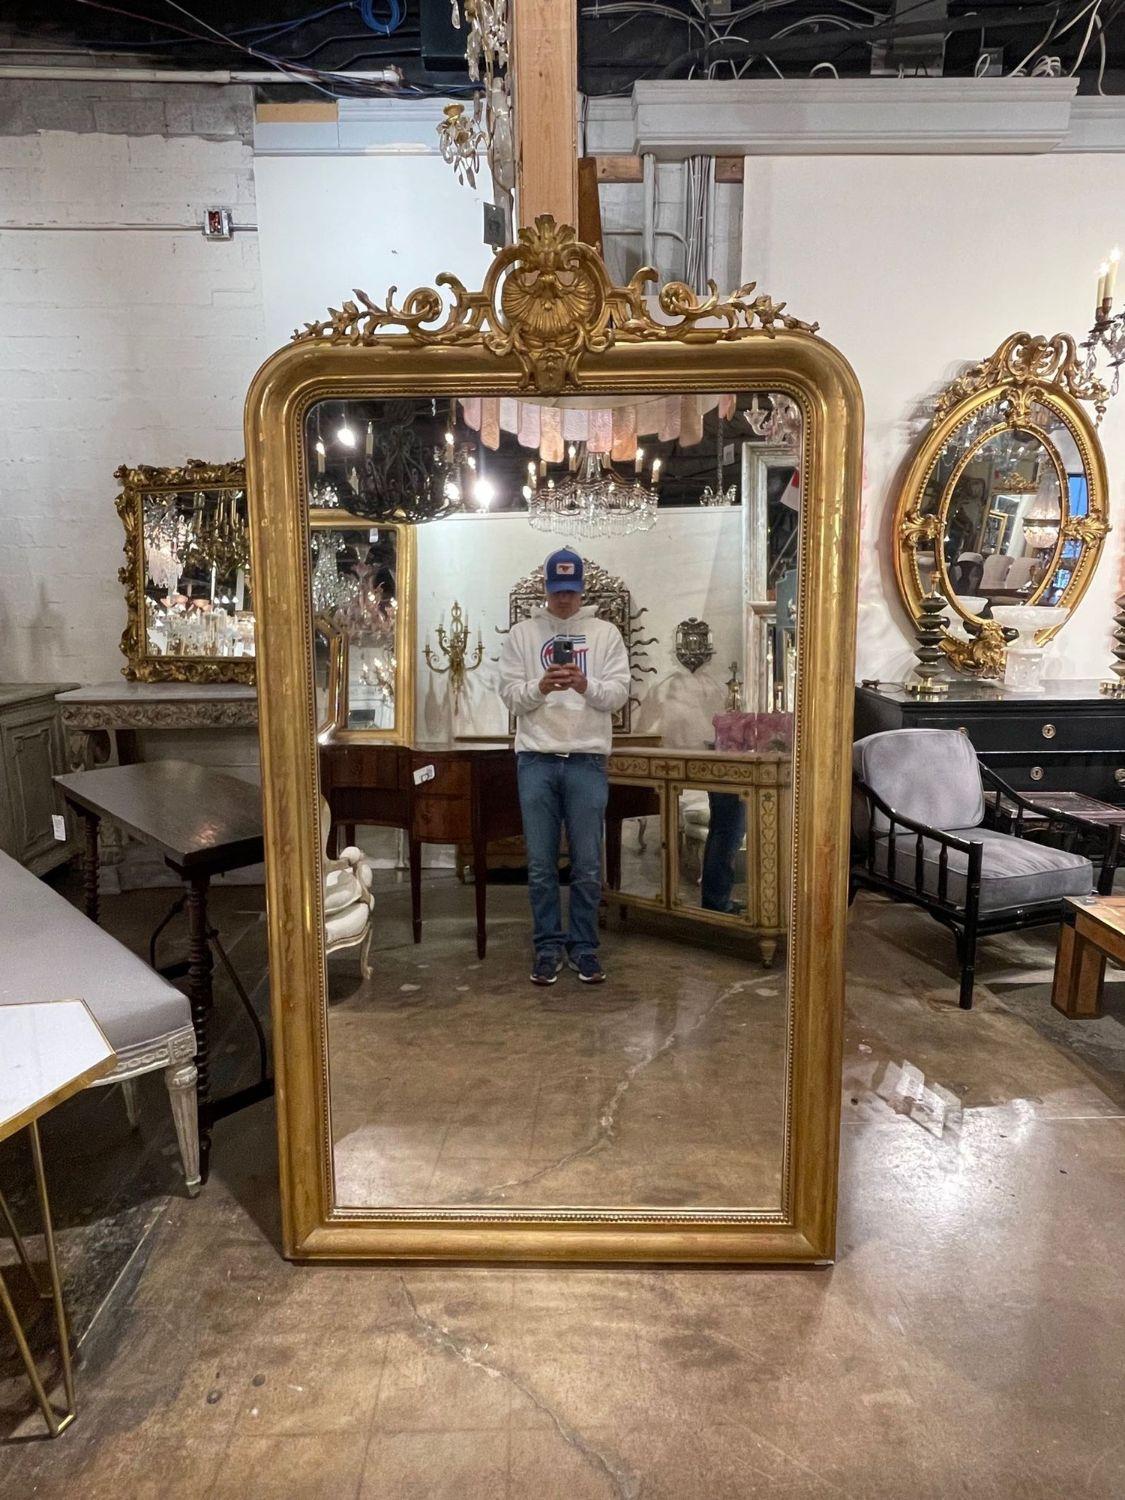 Elegant large scale 19th century gold gilt Louis Philippe mirror. This piece has a beautiful decorative crest at the top along with a floral pattern and beaded inner border. Very impressive!